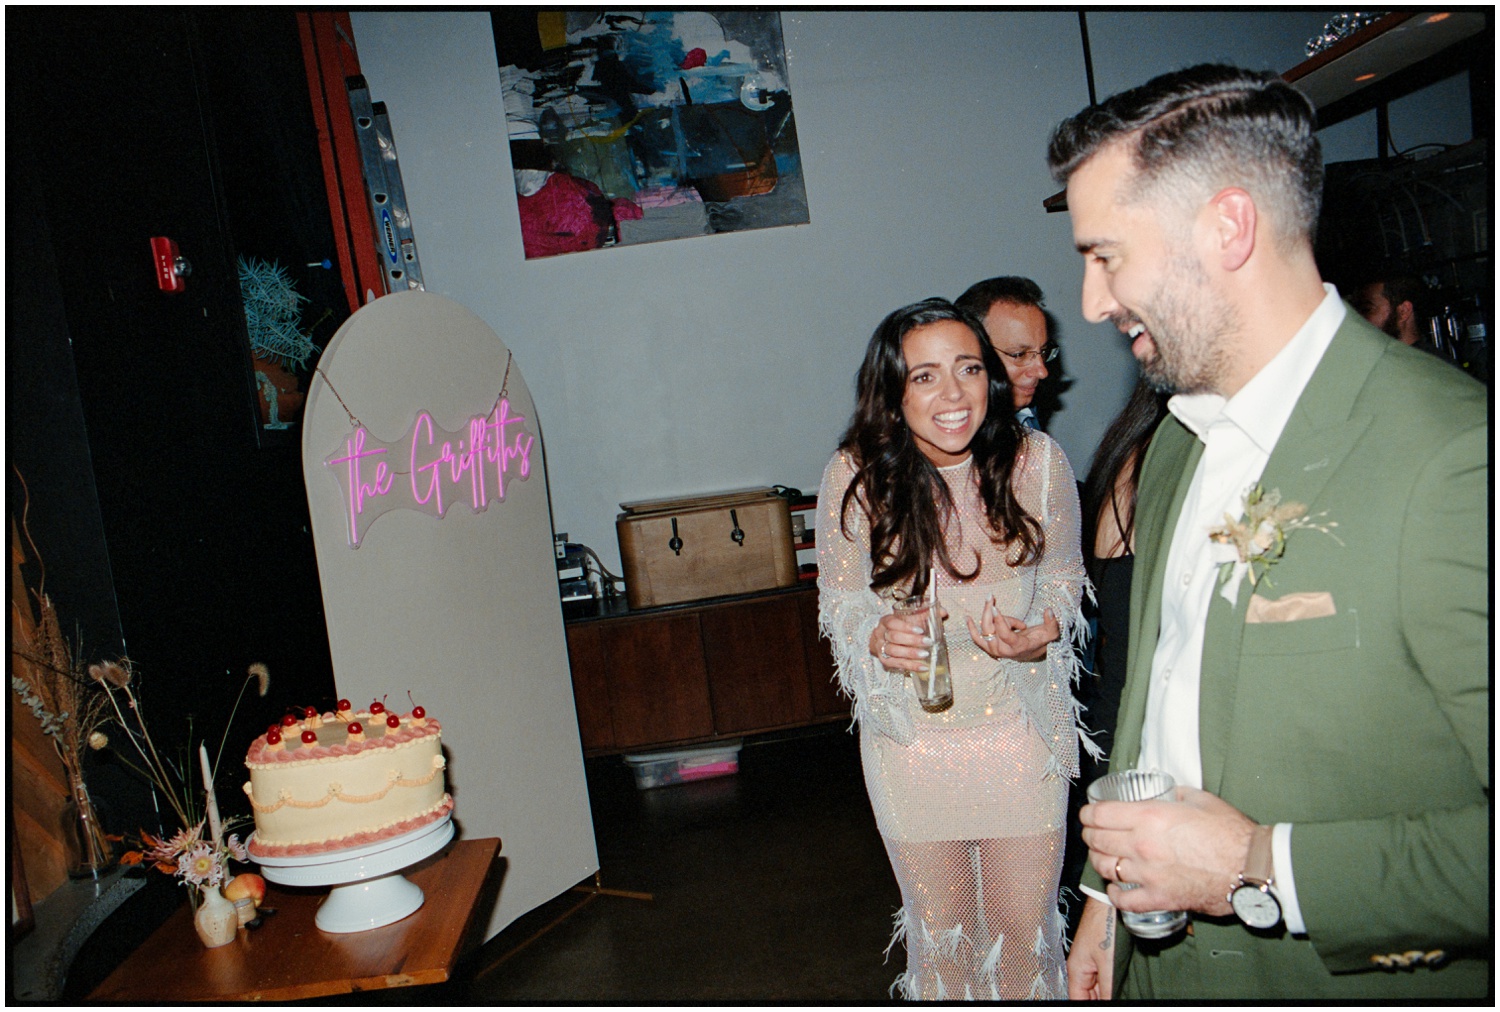 The bride and groom are flabergasted at their beautiful wedding cake made by their friend.